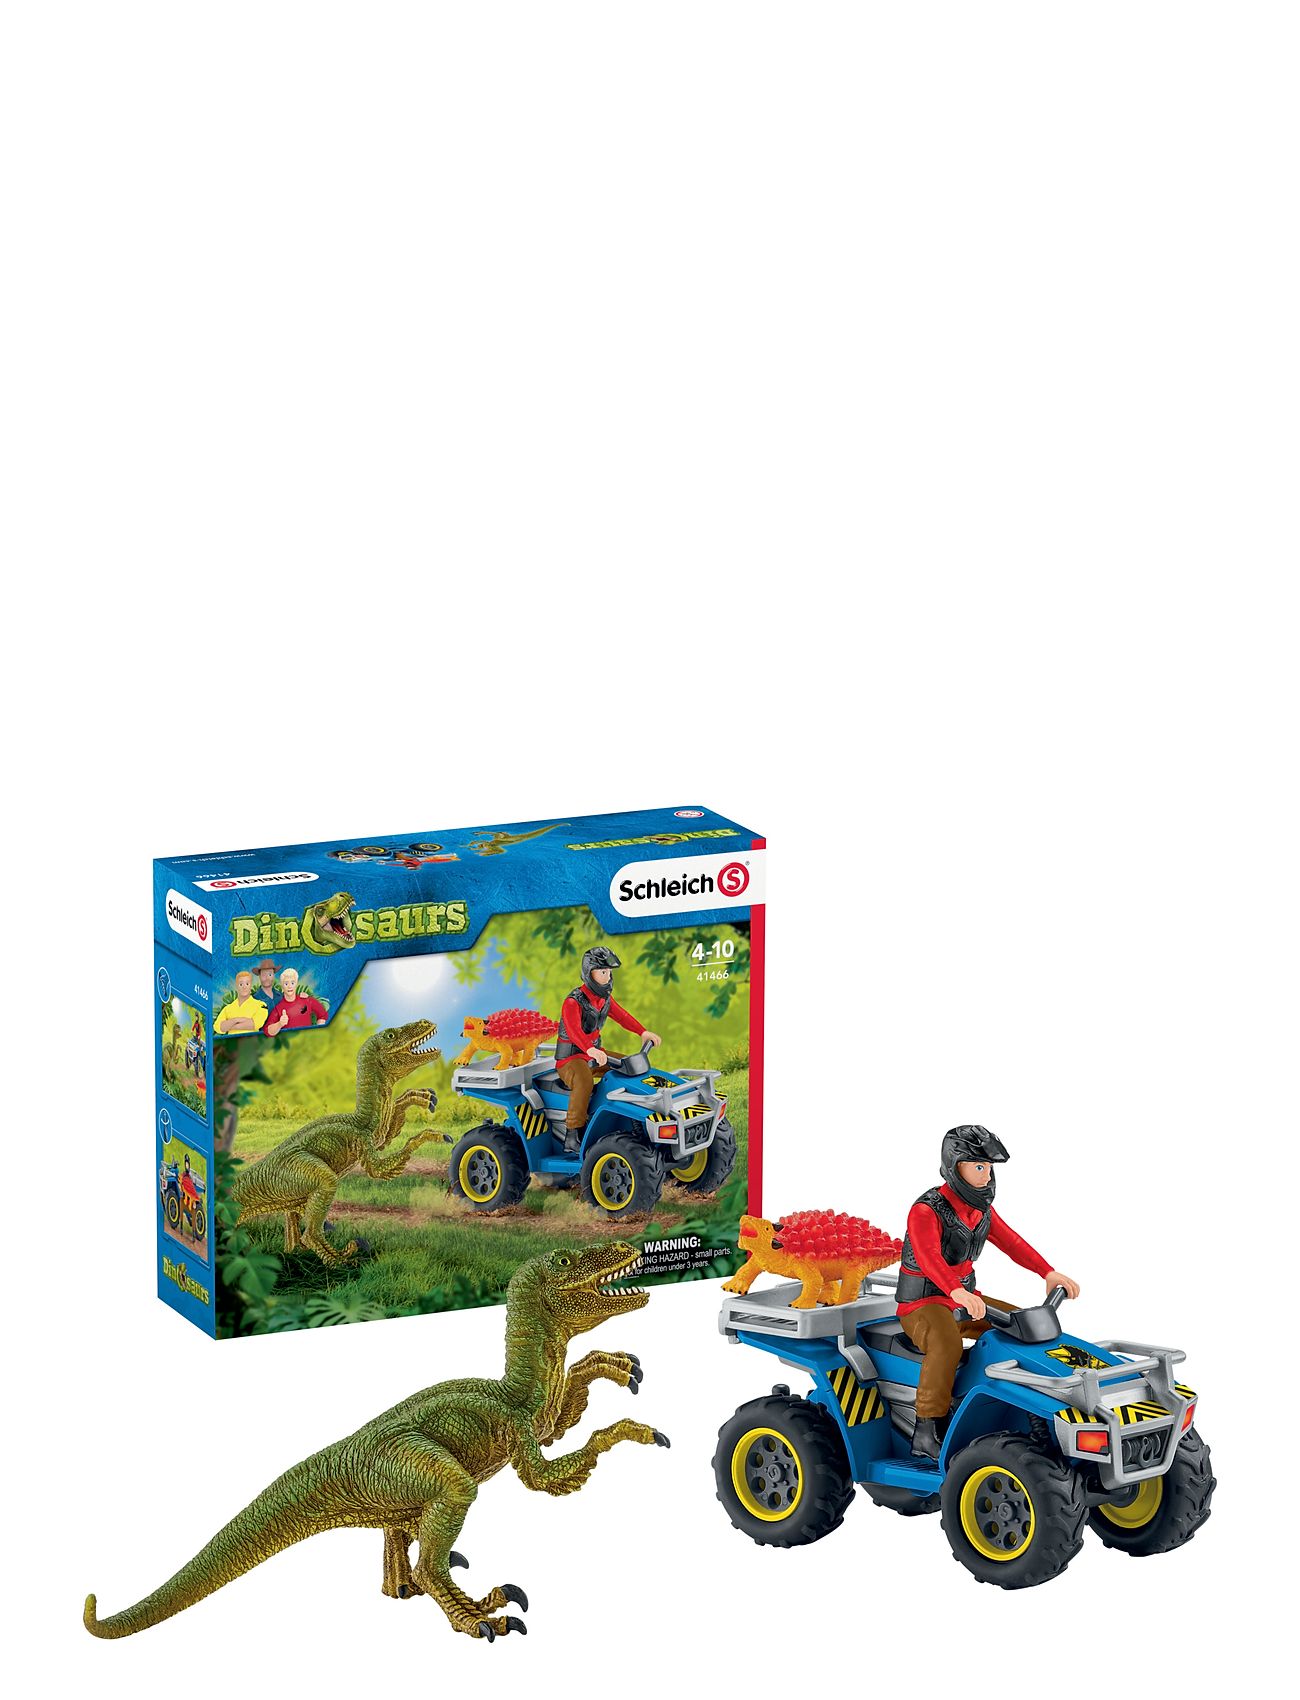 Schleich Quad Escape From Velociraptor Toys Playsets & Action Figures Play Sets Multi/patterned Schleich